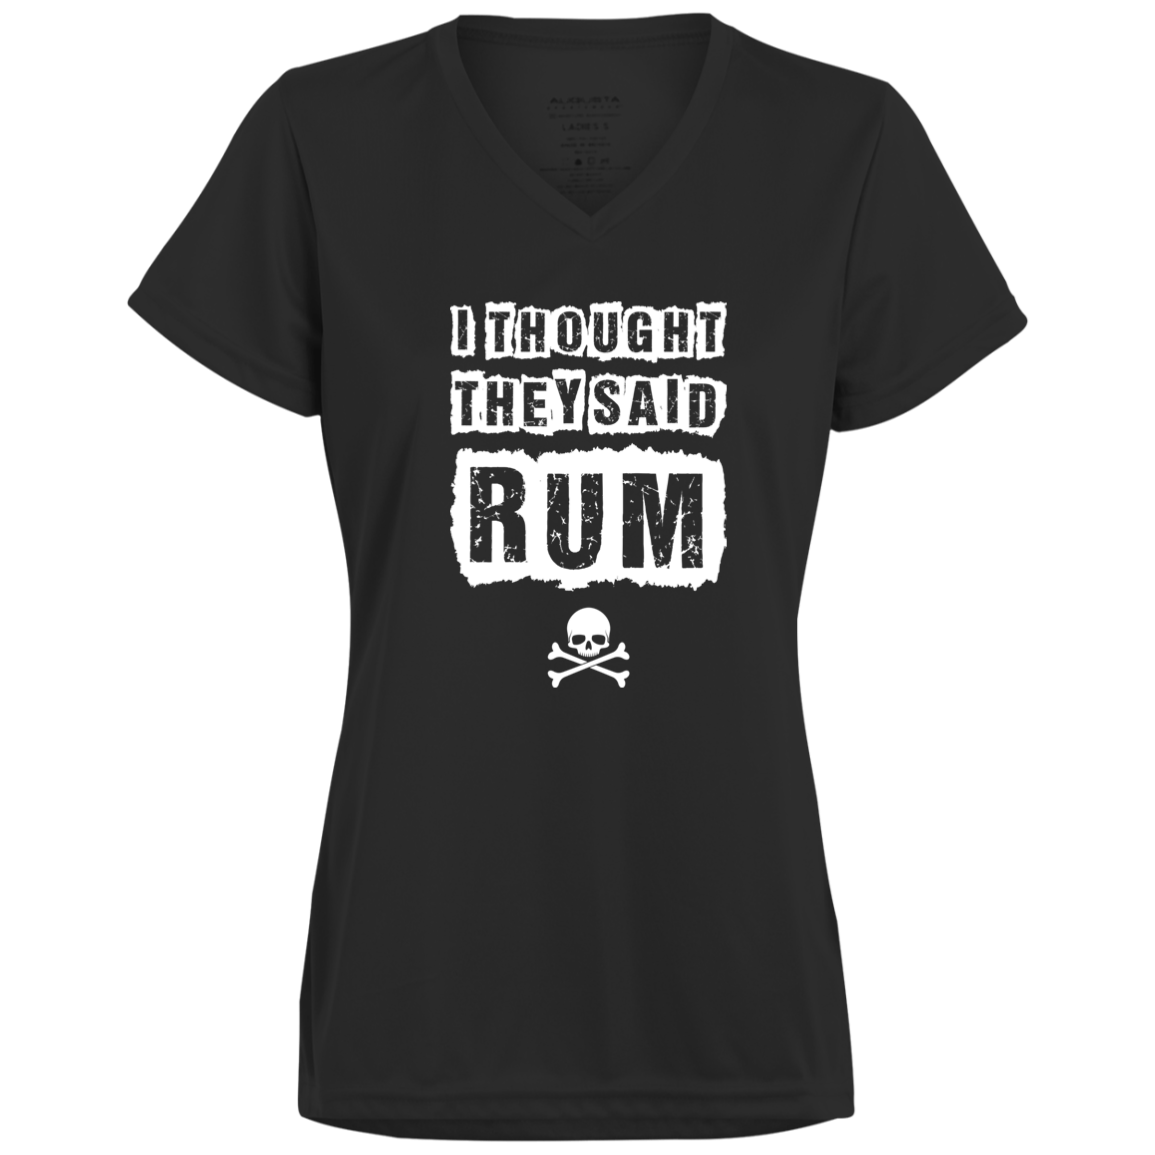 Women's Funny Running Top I: thought they said RUM "